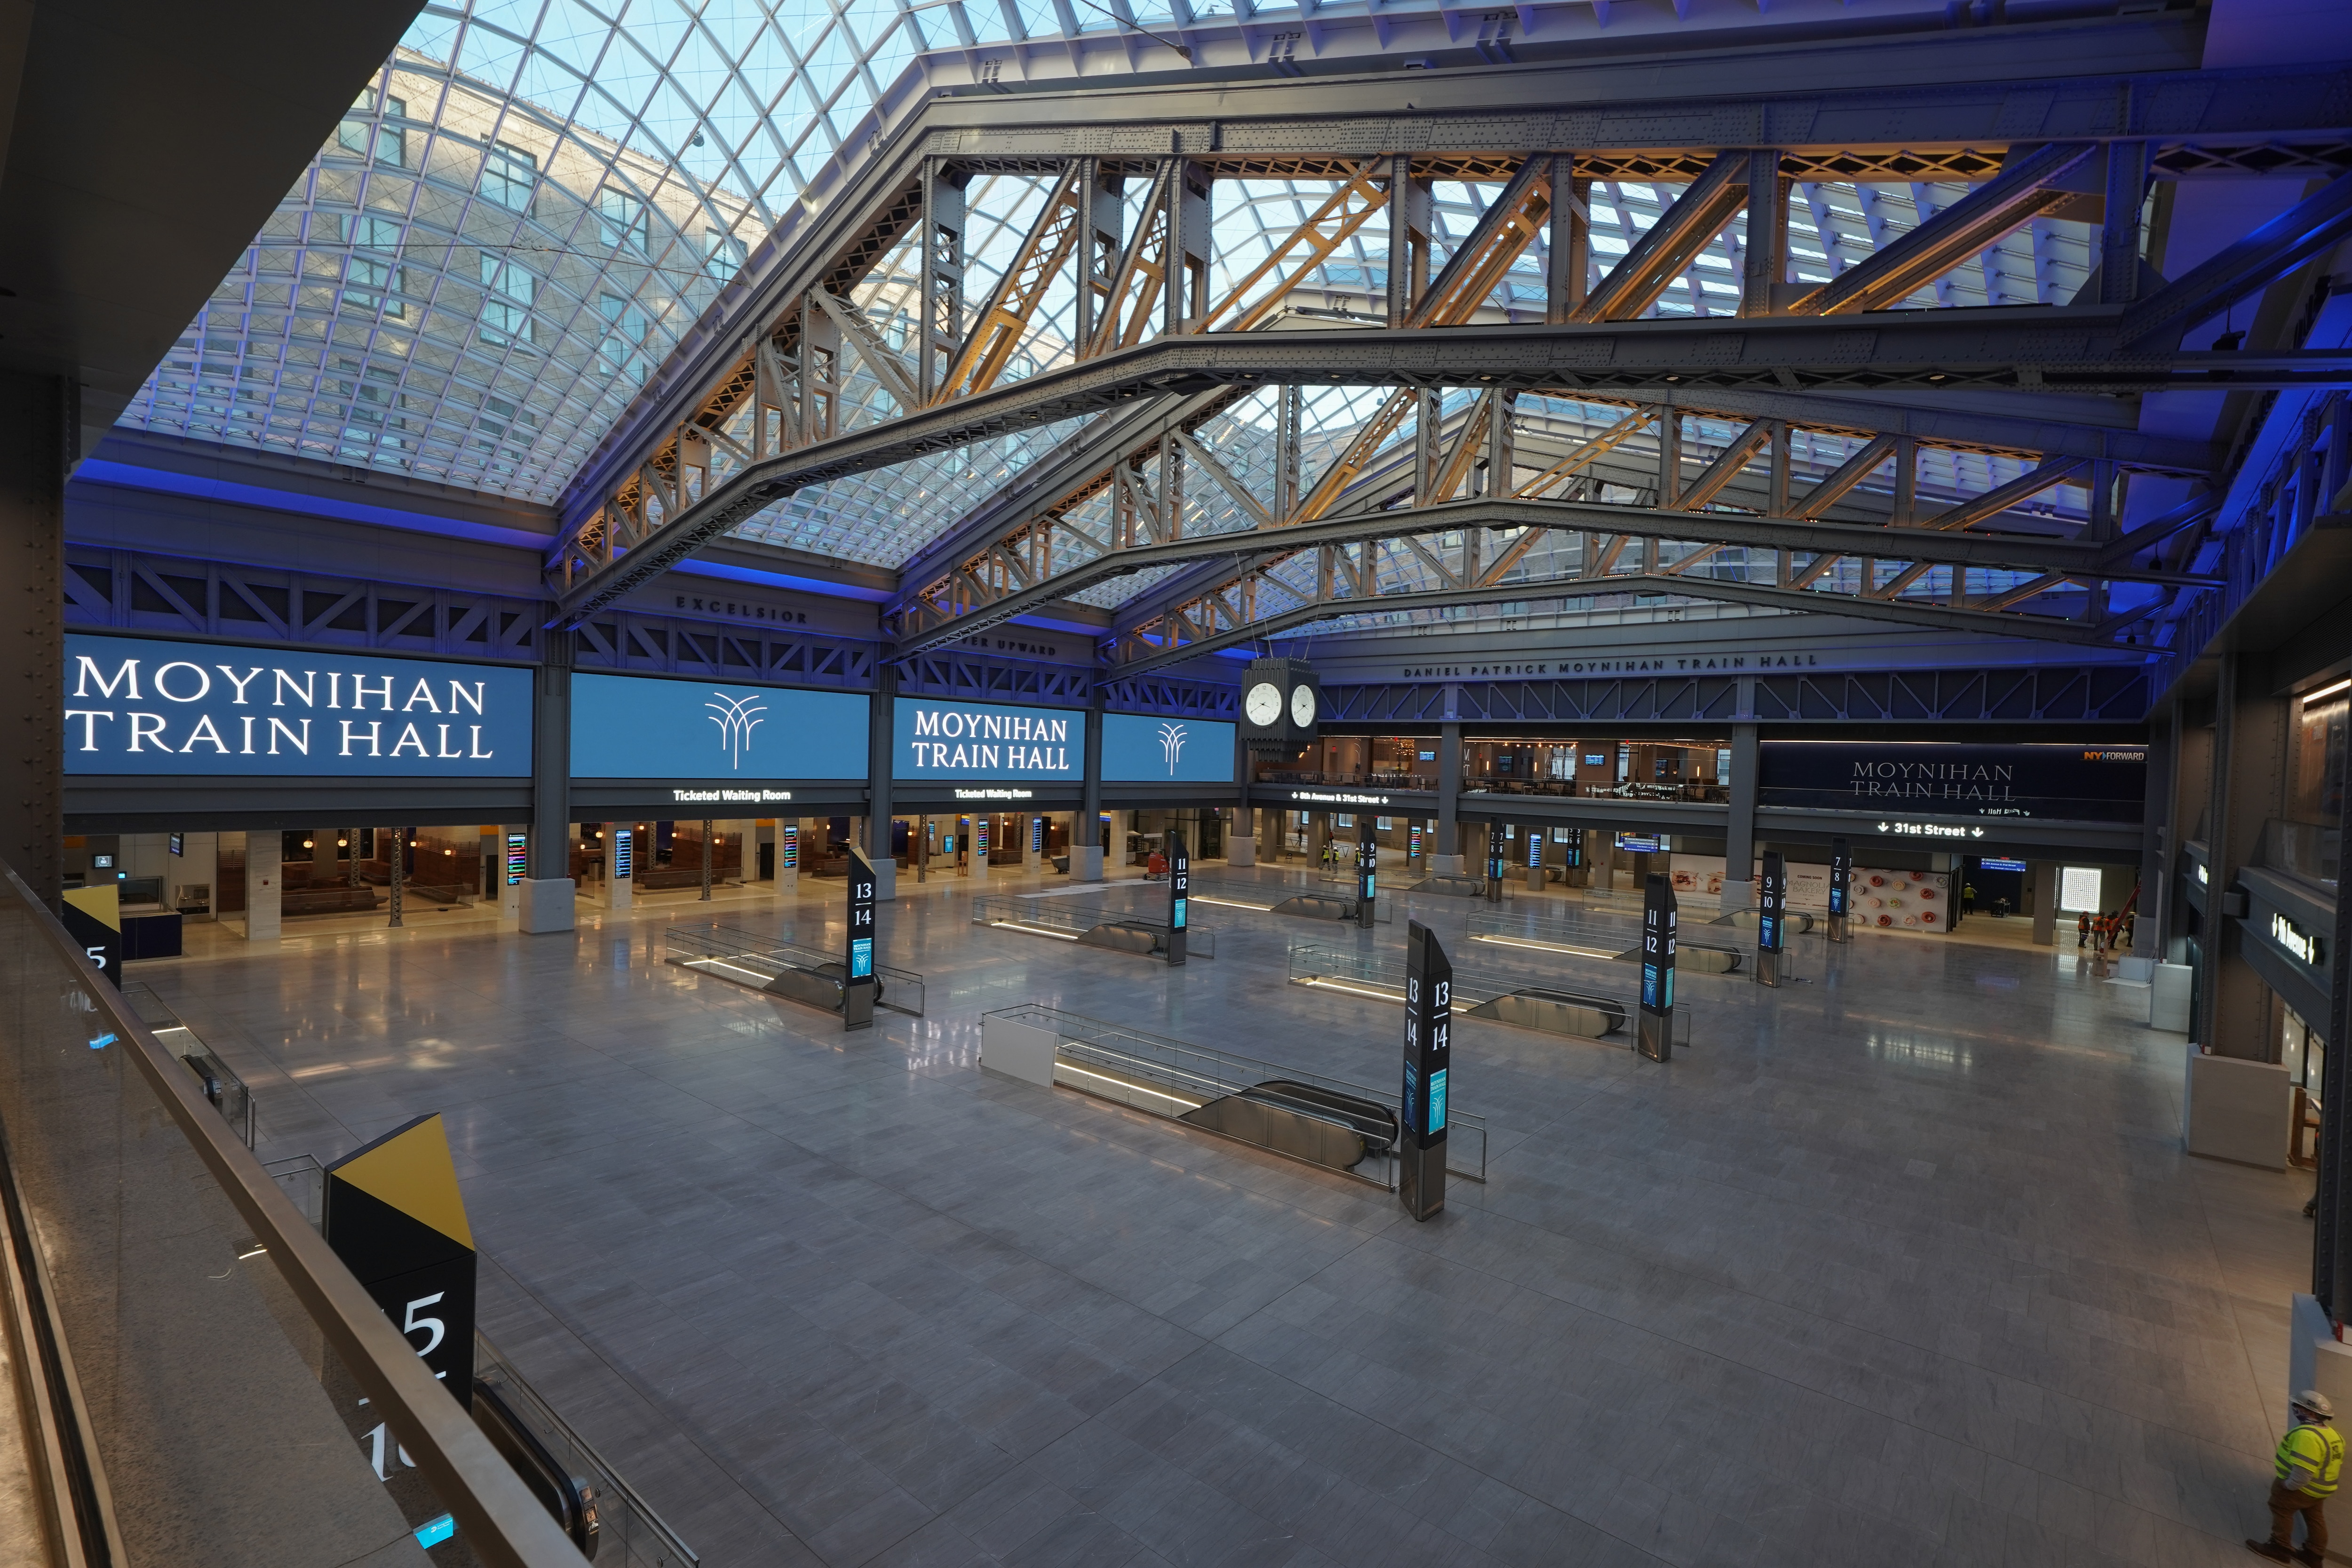 See photos of Moynihan Train Hall, the new expansion of Penn Station